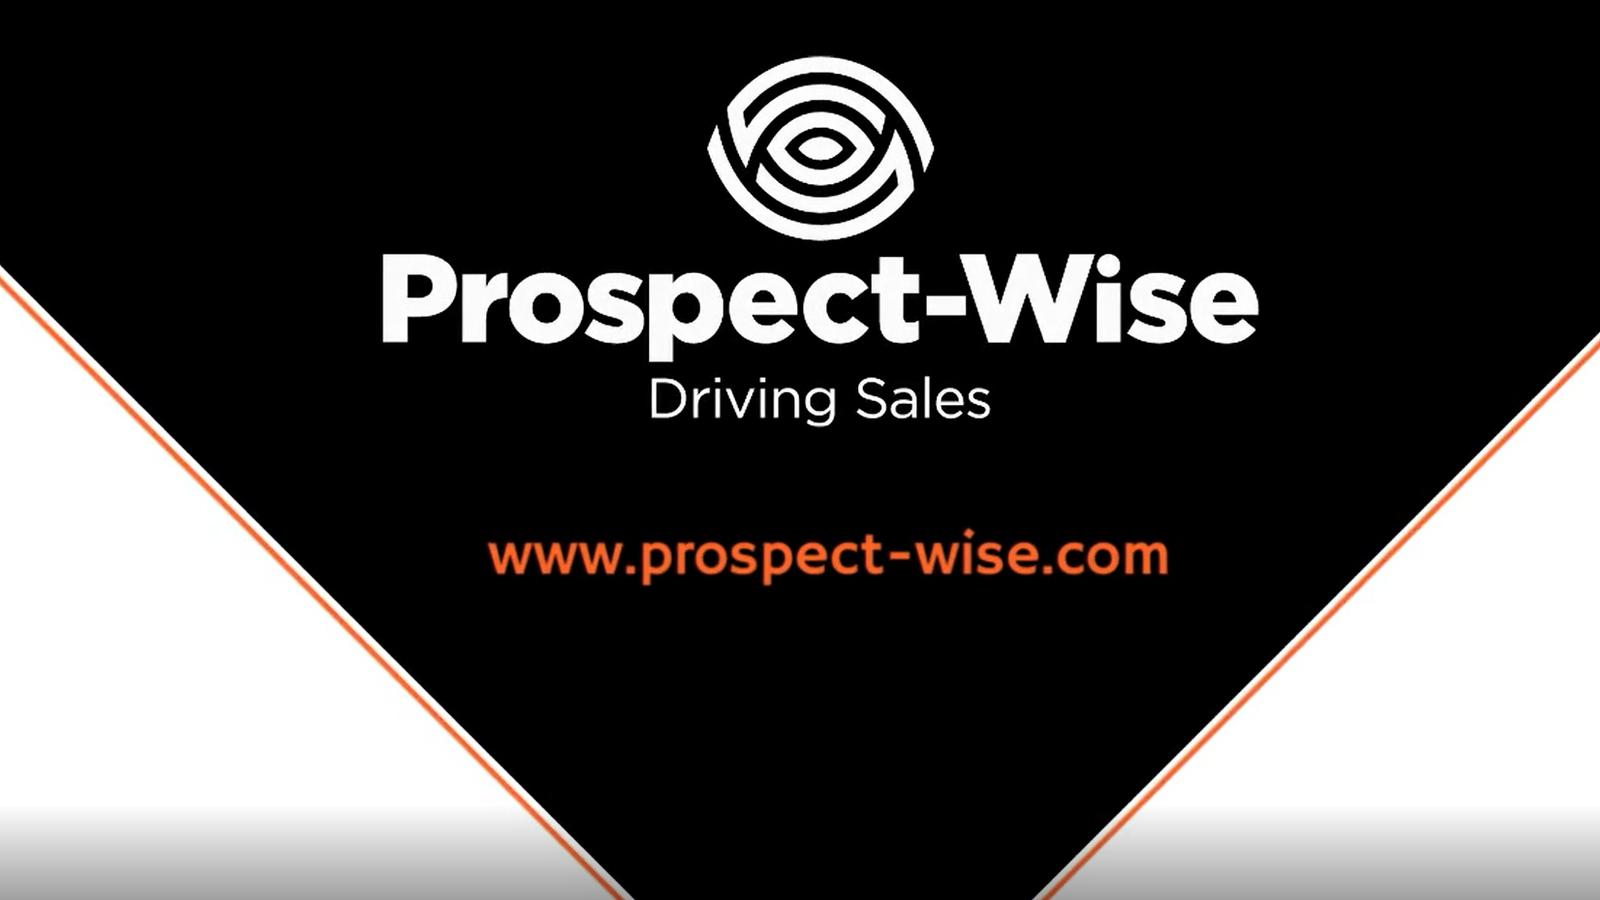 Prospect-Wise